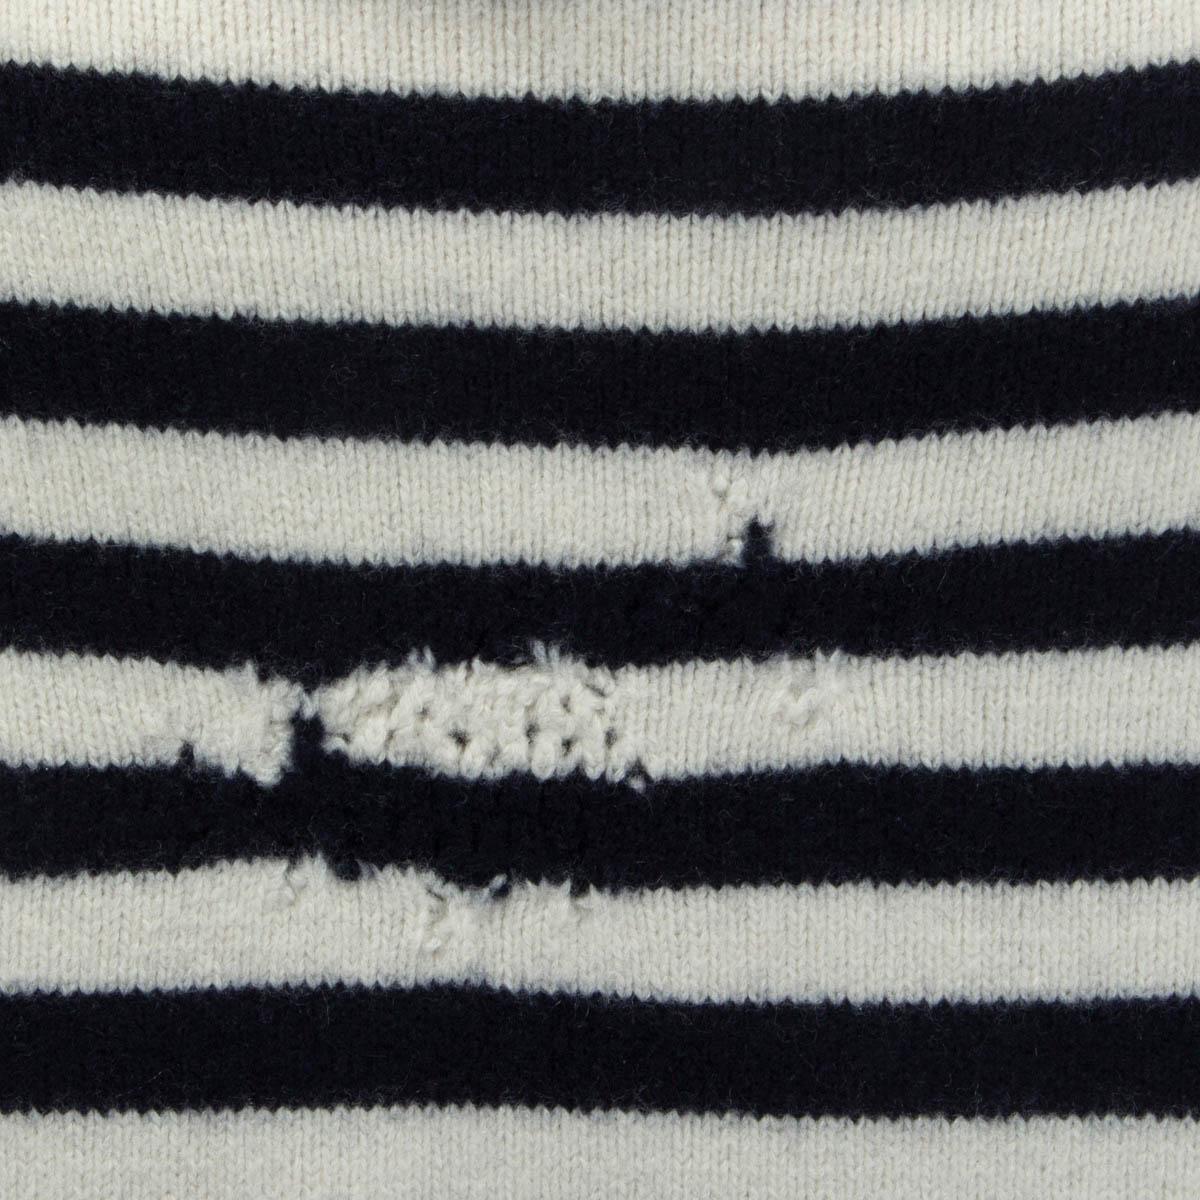 Women's CHRISTIAN DIOR white & blue cashmere & wool STRIPED DISTRESSED Sweater 38 S